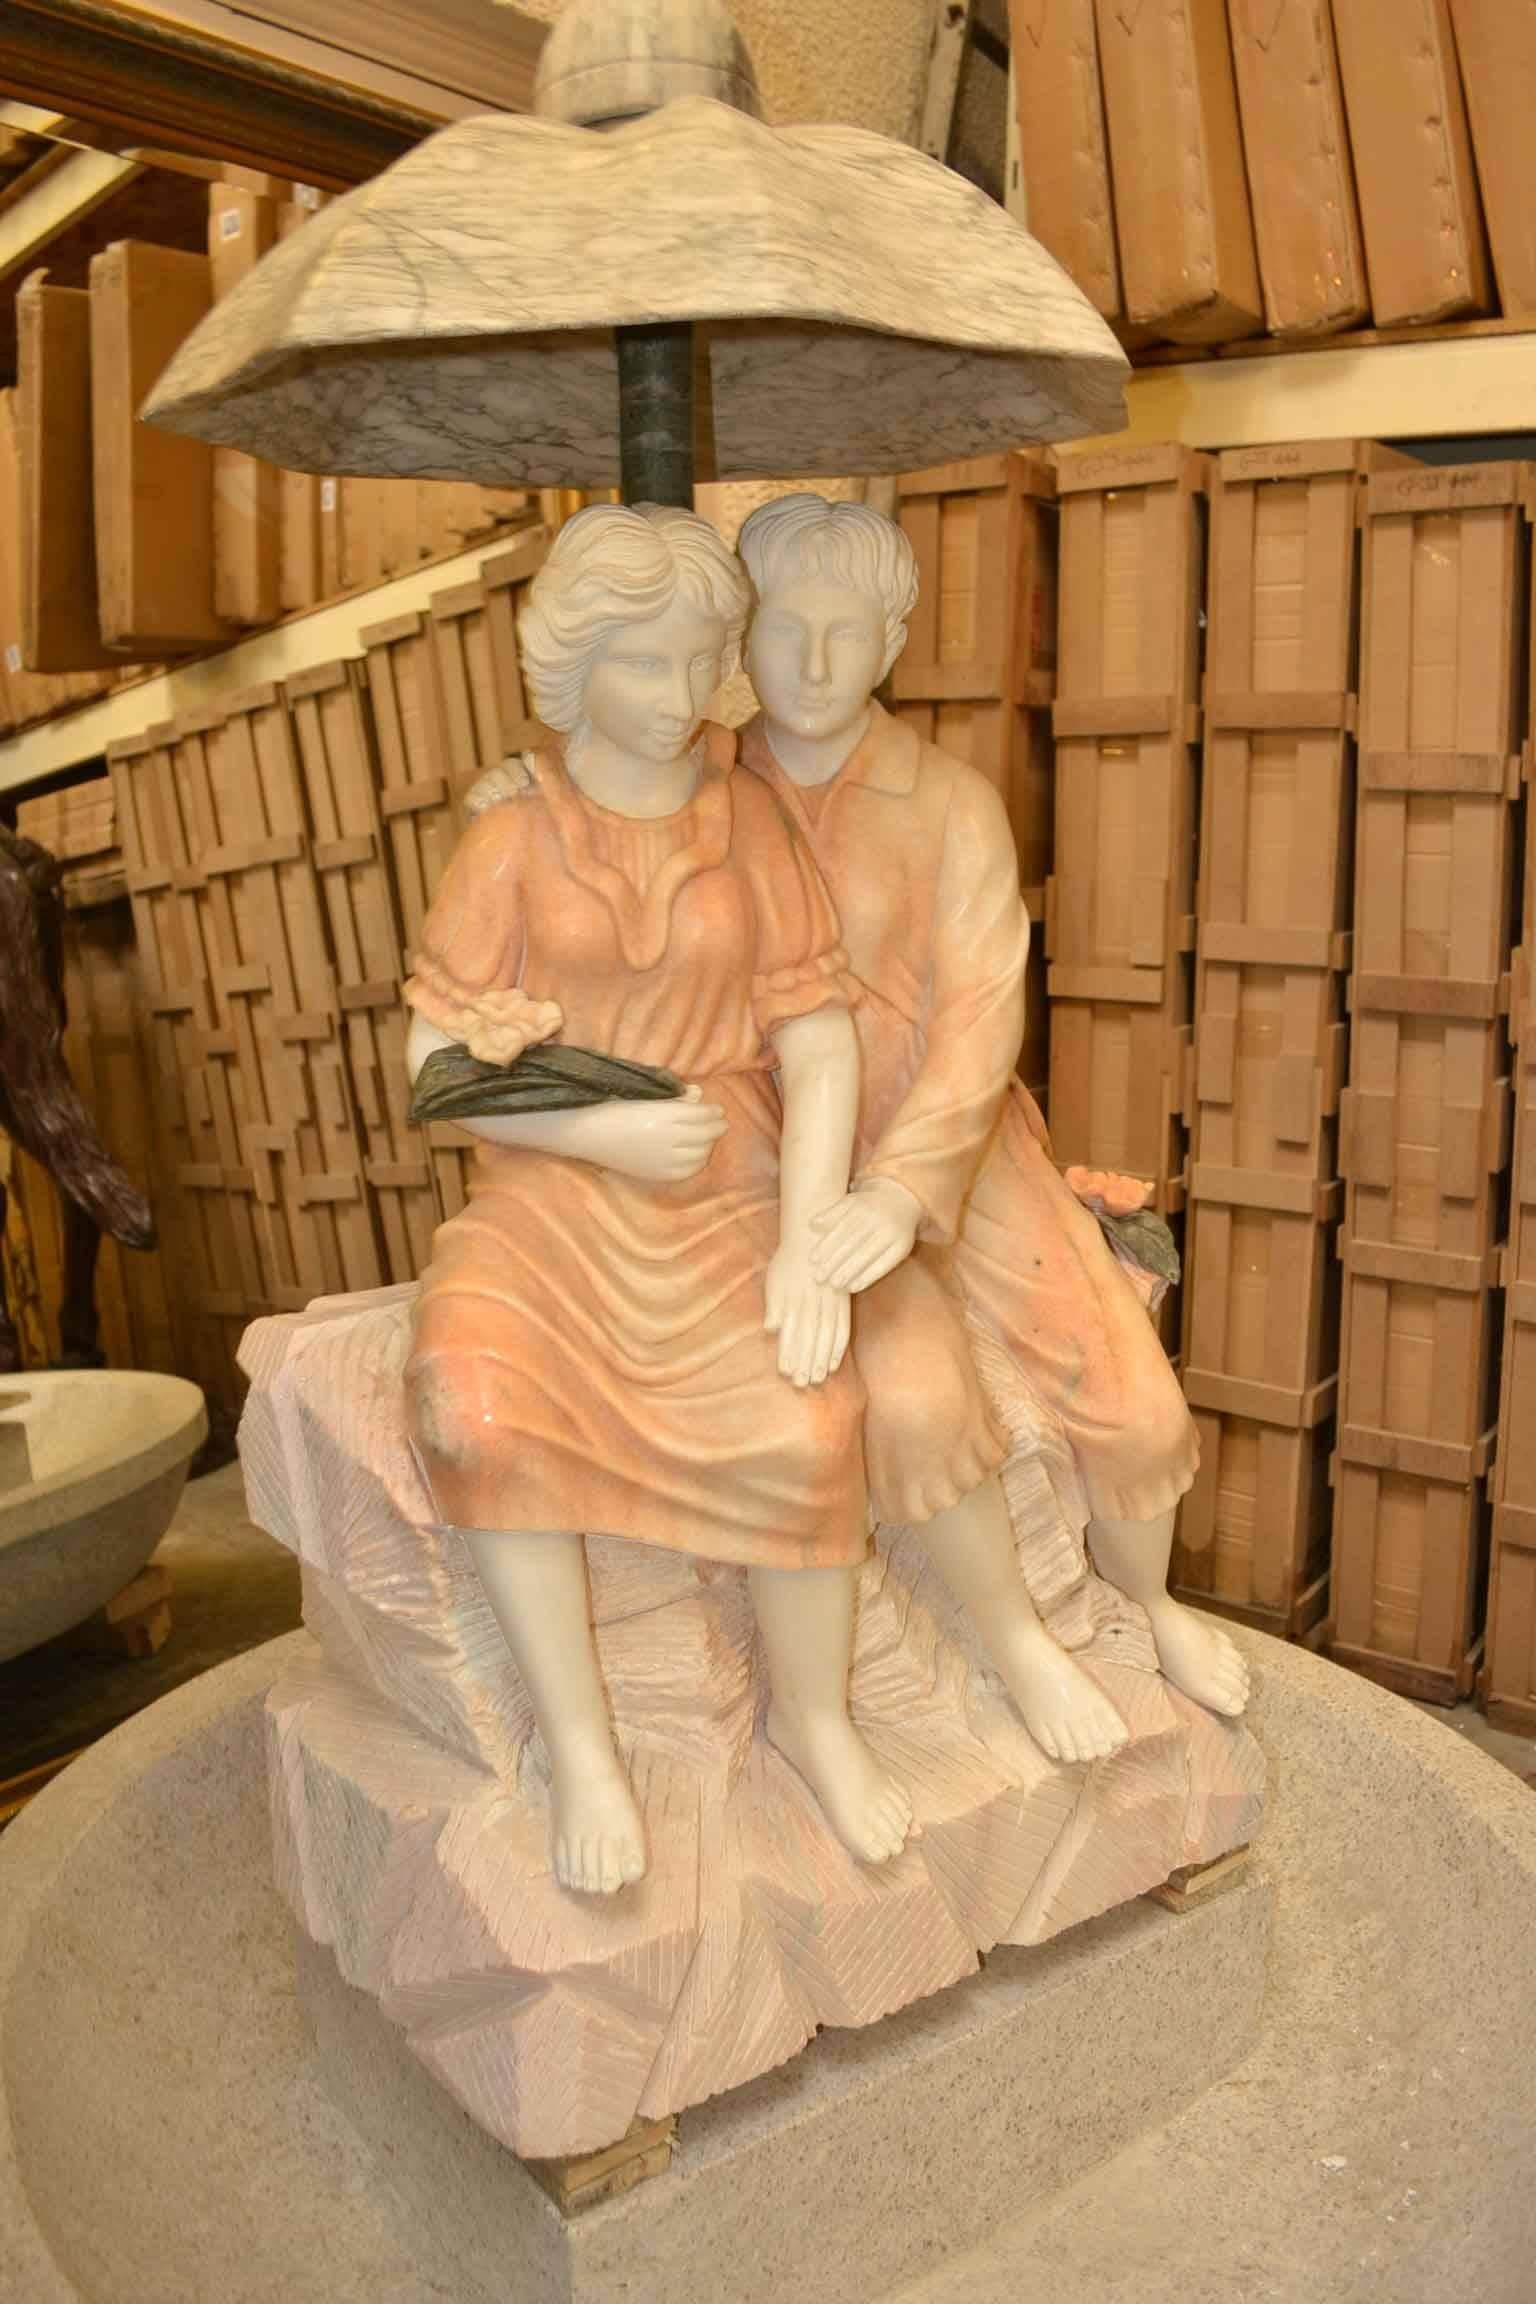 This is a charming multi-coloured marble fountain statue of two lovers sheltered under an umbrella, dating from the last quarter of the 20th century.

This magnificent work of art is hand-carved from solid blocks of Italian Carrara marble.

The